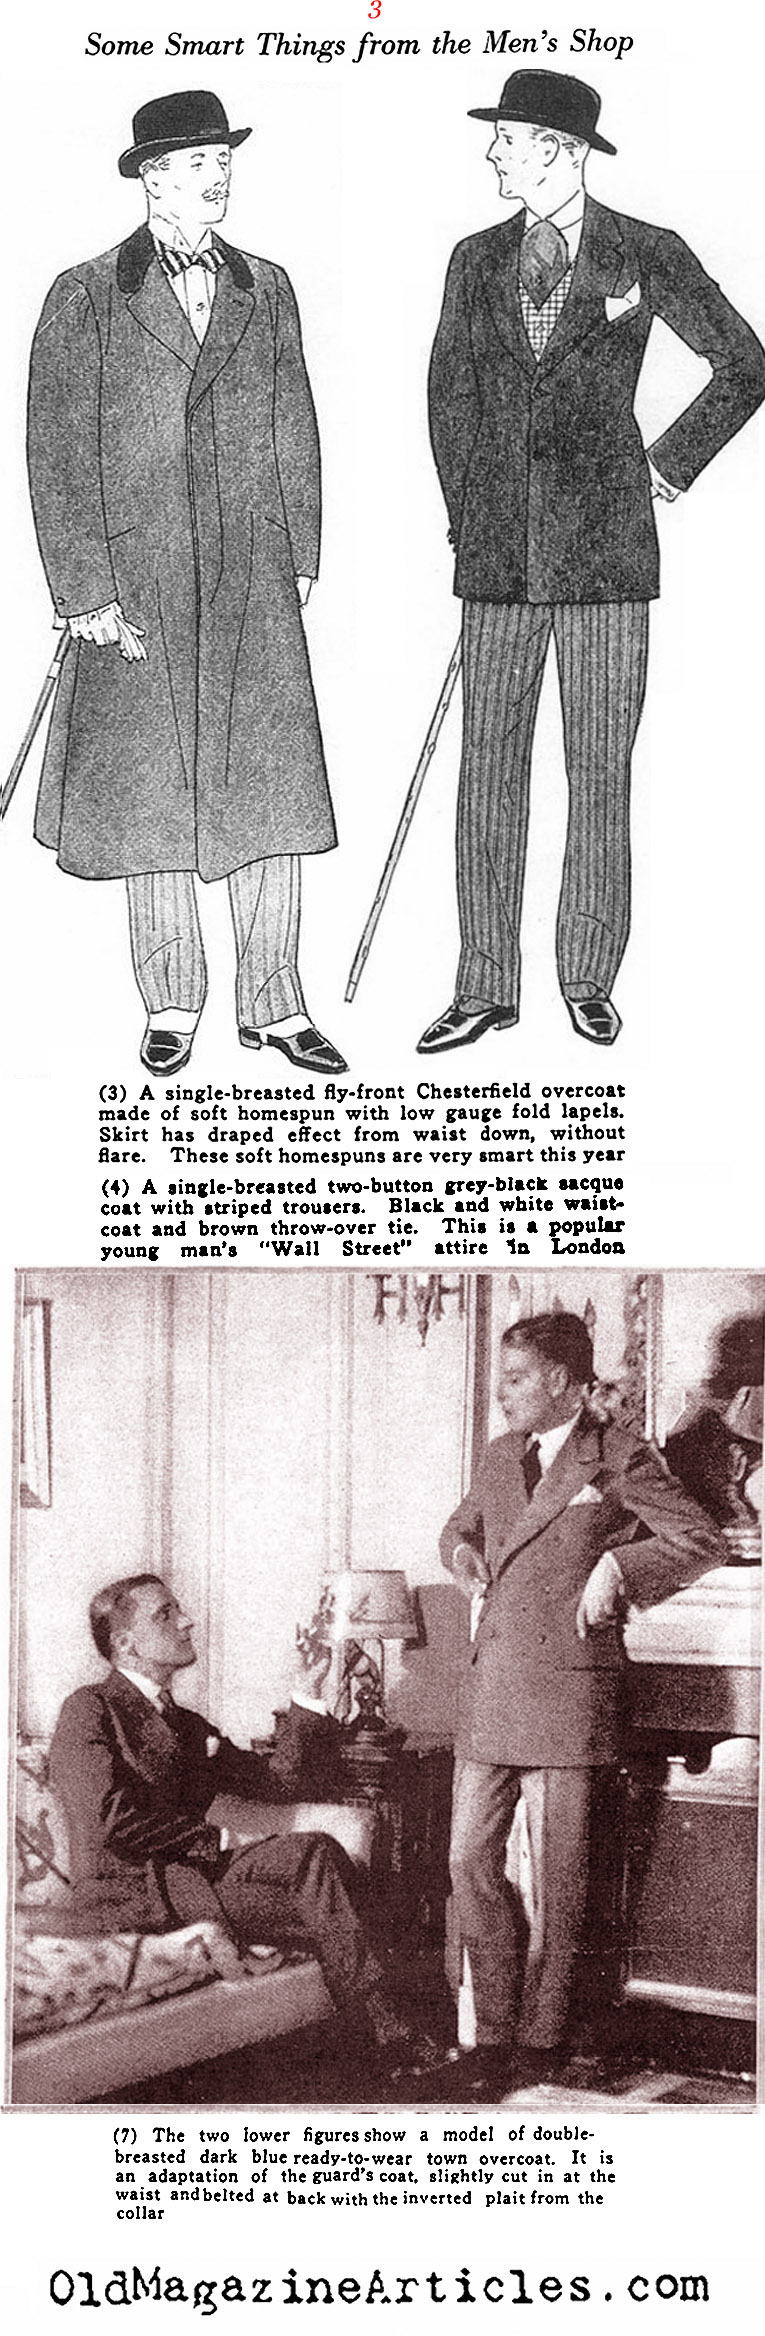 Clothing for Fox Hunters and Wall Streeters  (Vanity Fair Magazine, 1921)